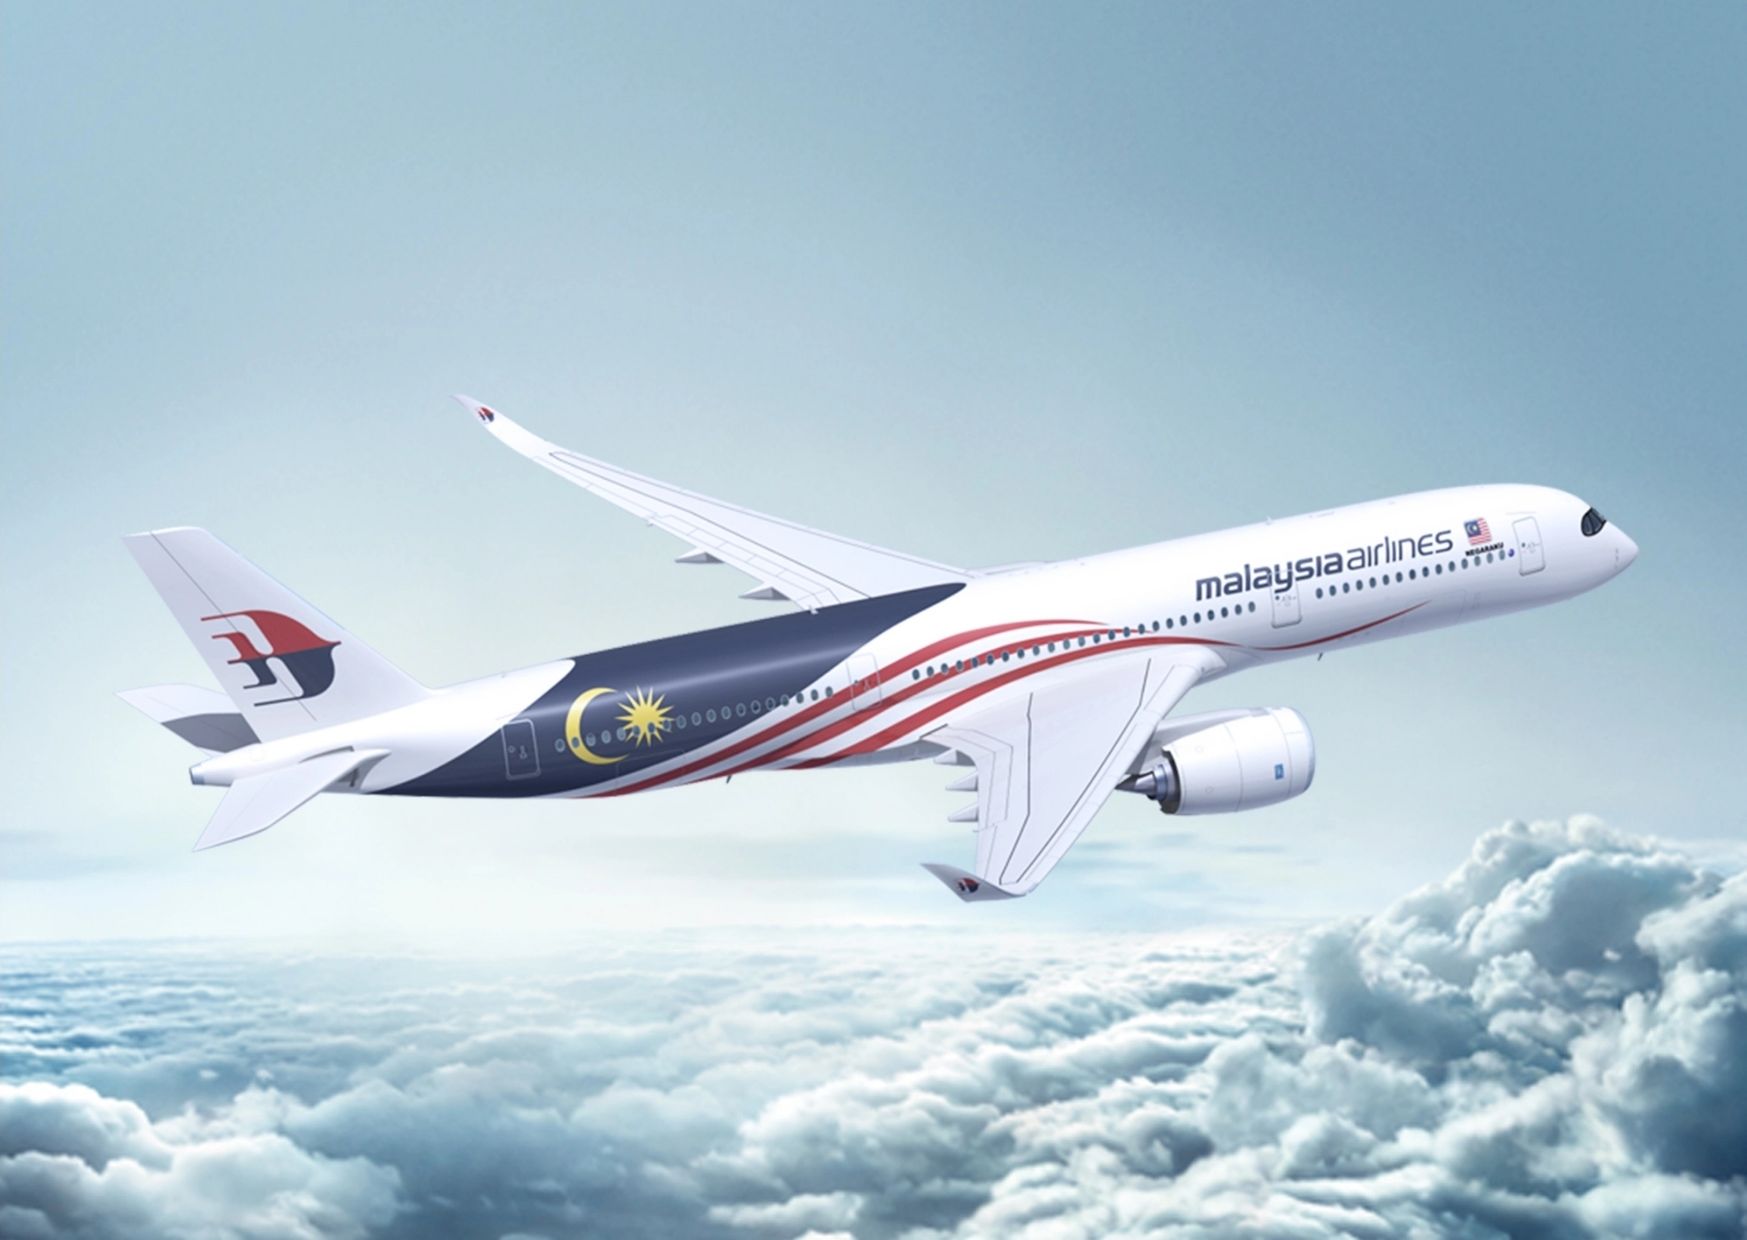 Malaysia Airlines extends its booking flexibility until December 2022